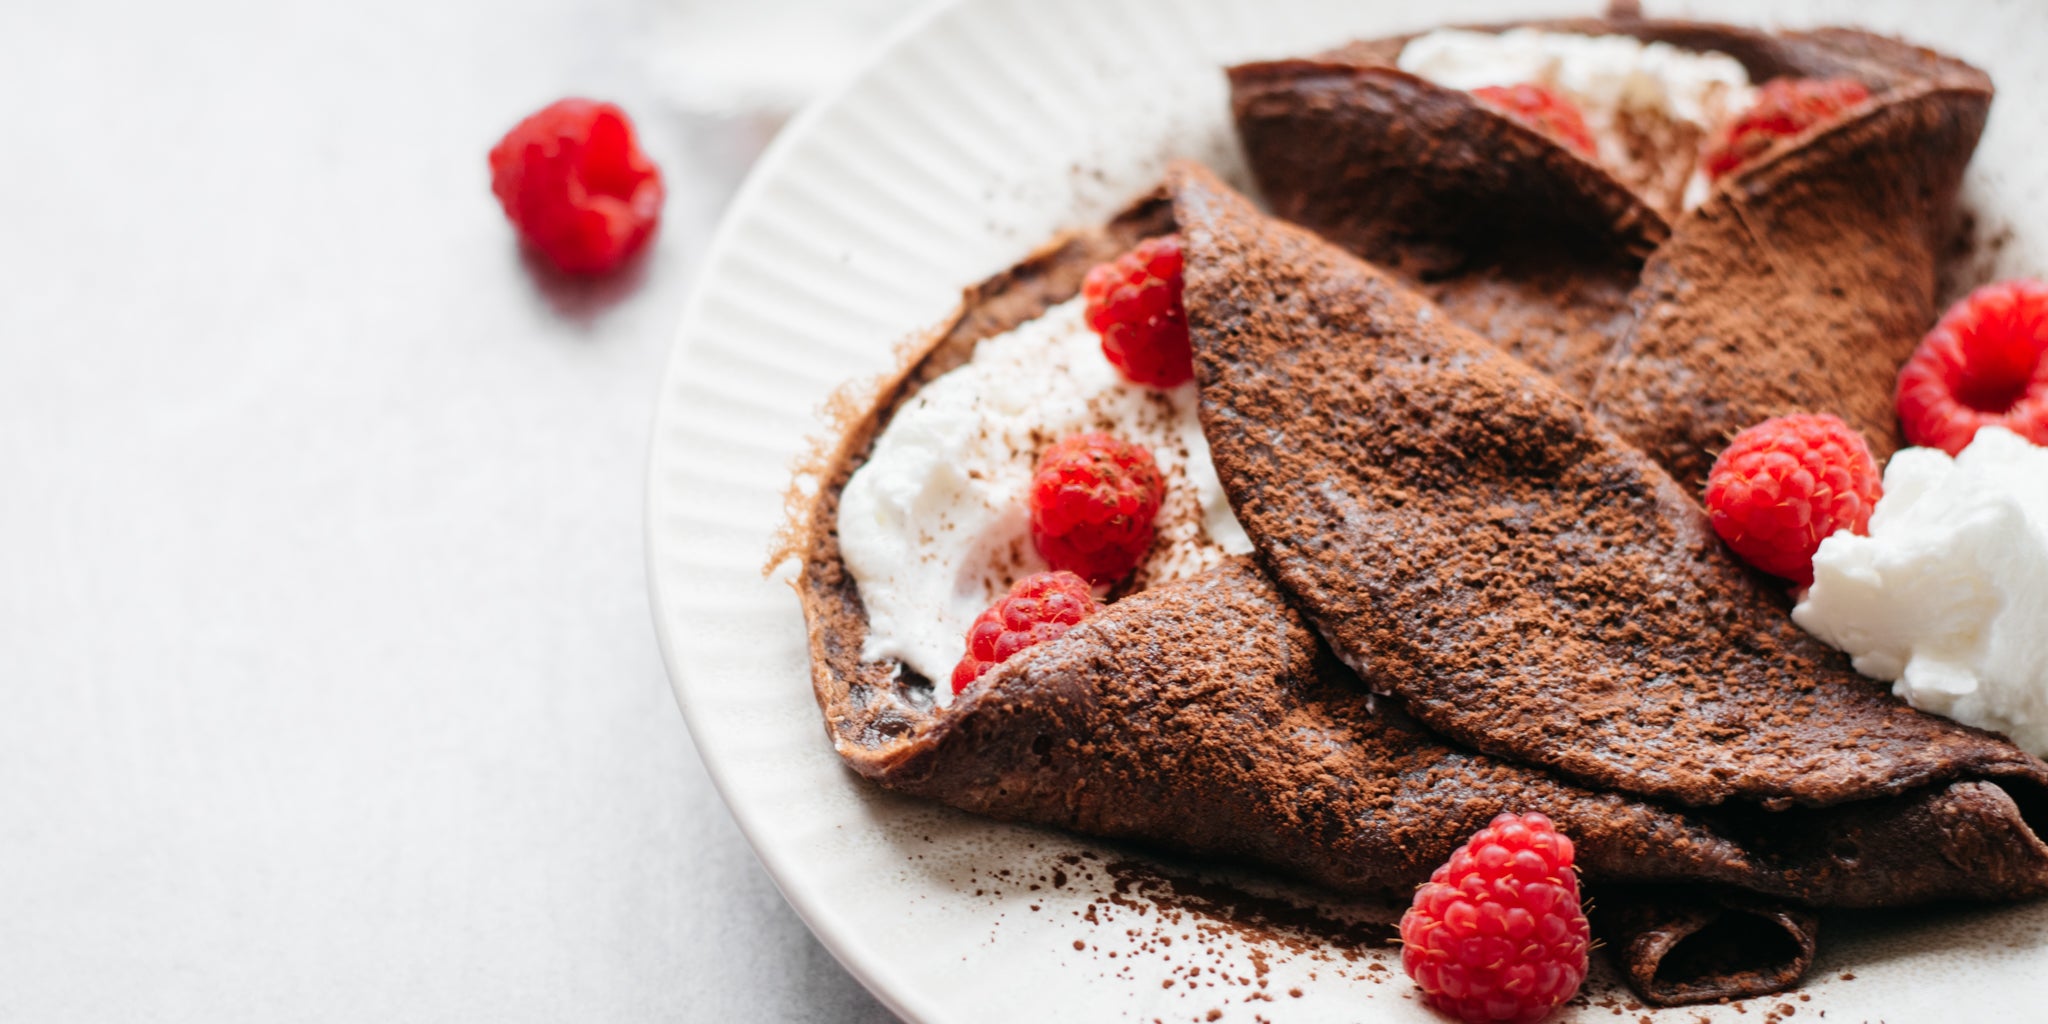 Close up shot of two chocolate crepes on a white plate surrounded by raspberries